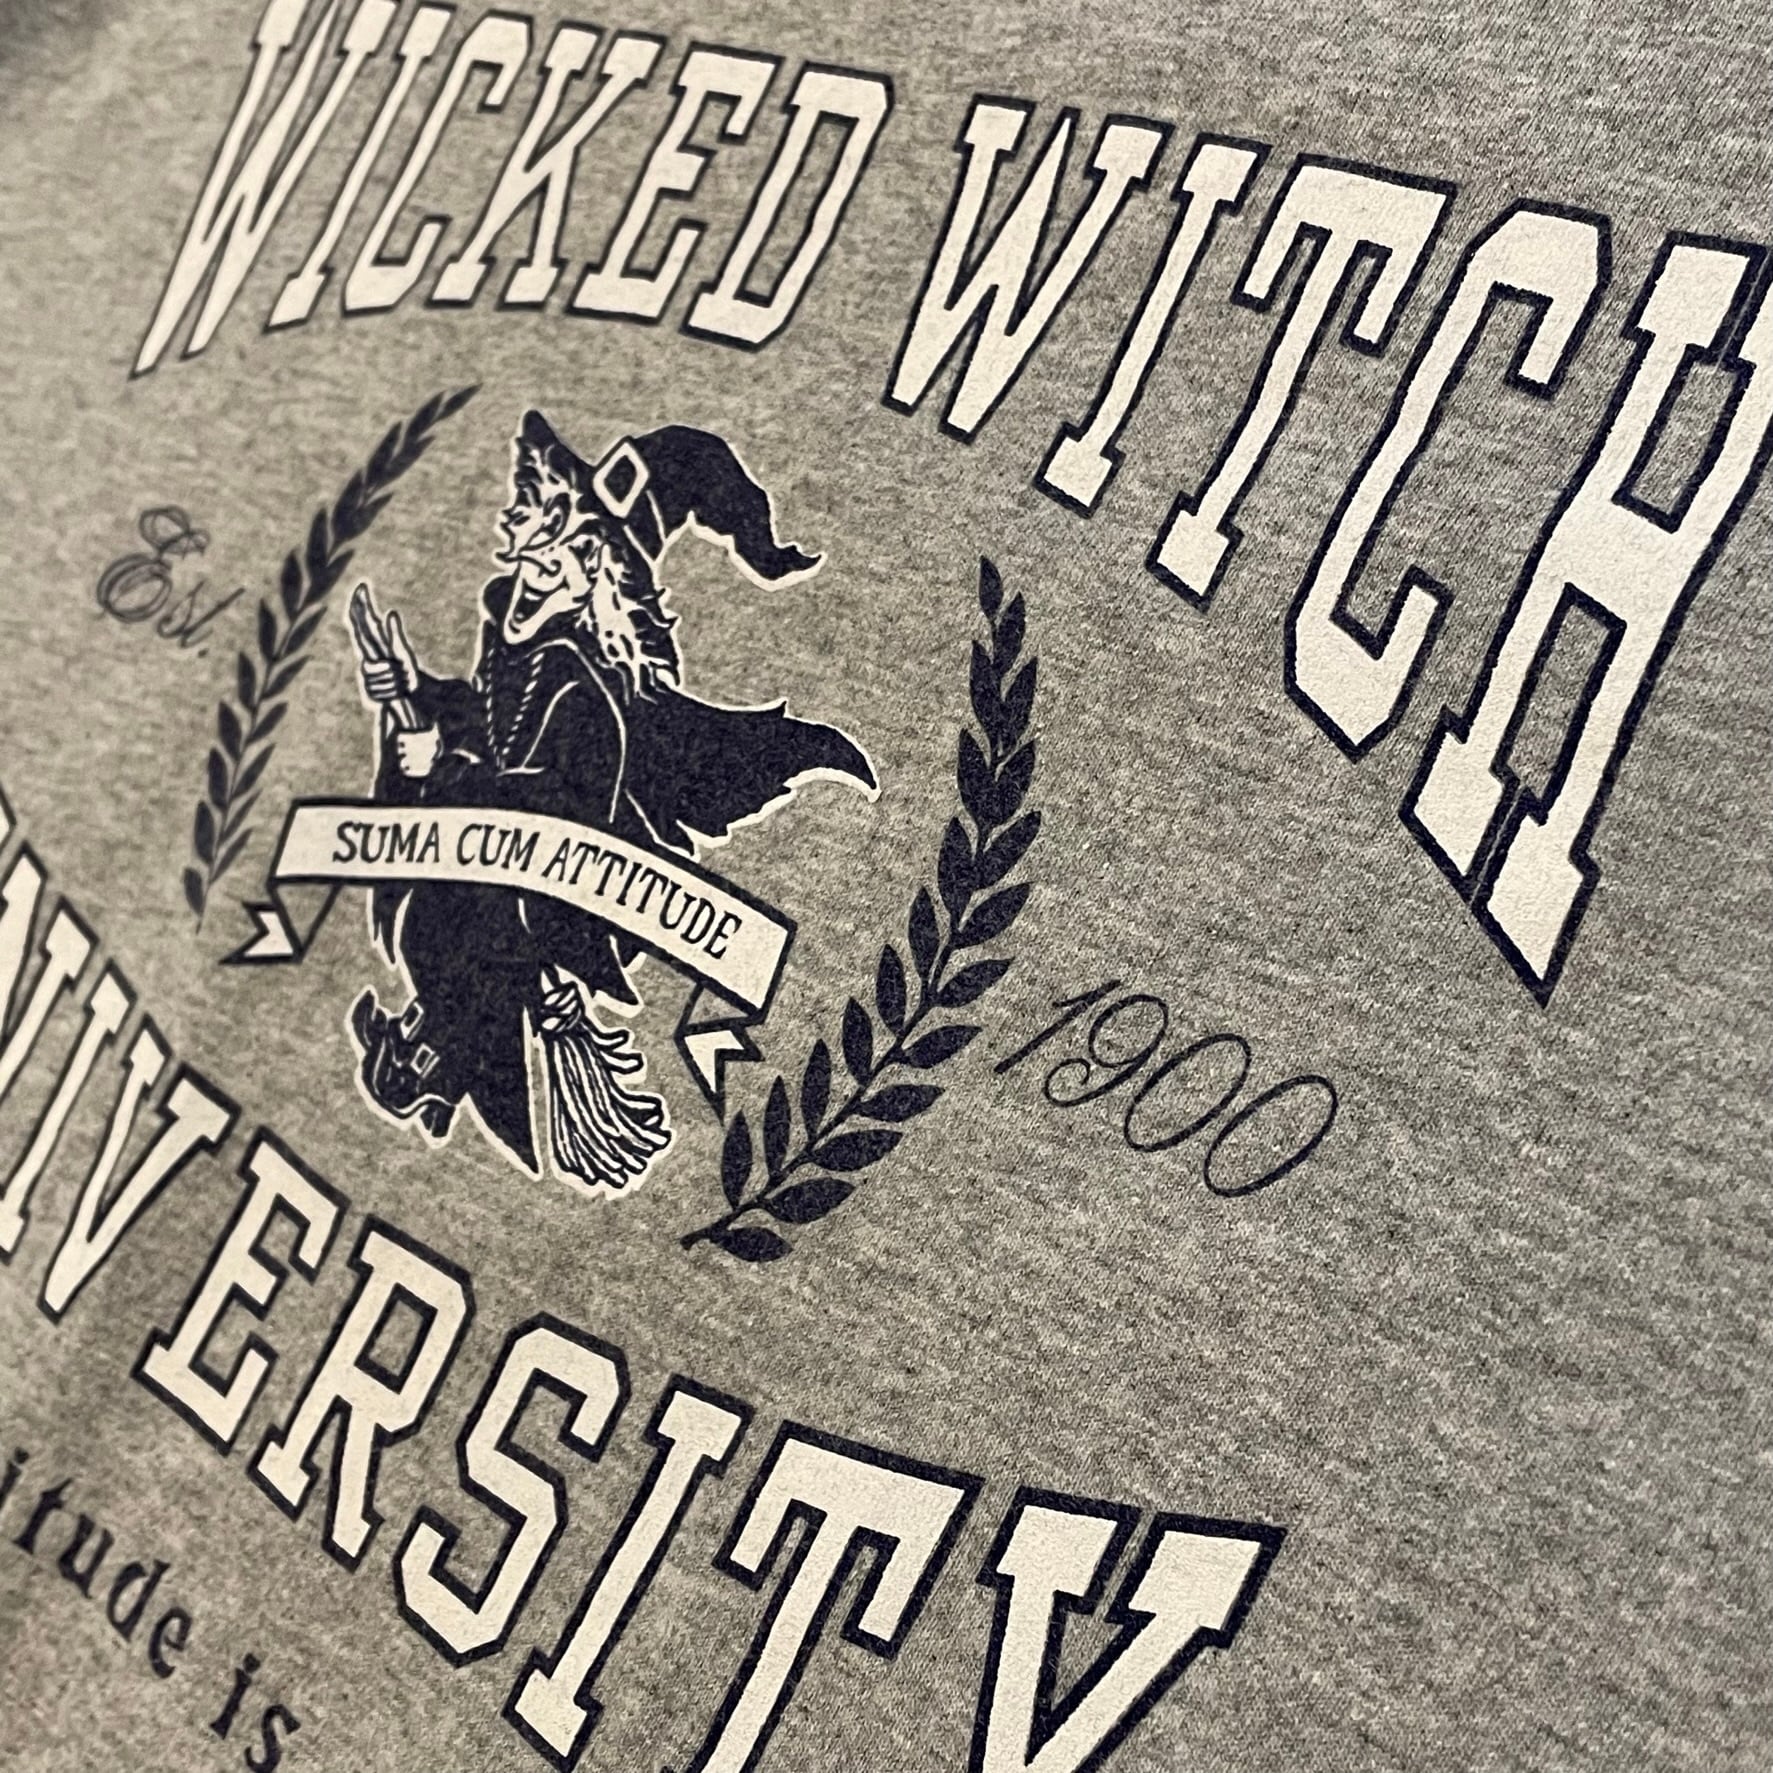 FRUIT OF THE LOOM】カレッジ風 ロゴ Tシャツ wicked witch university